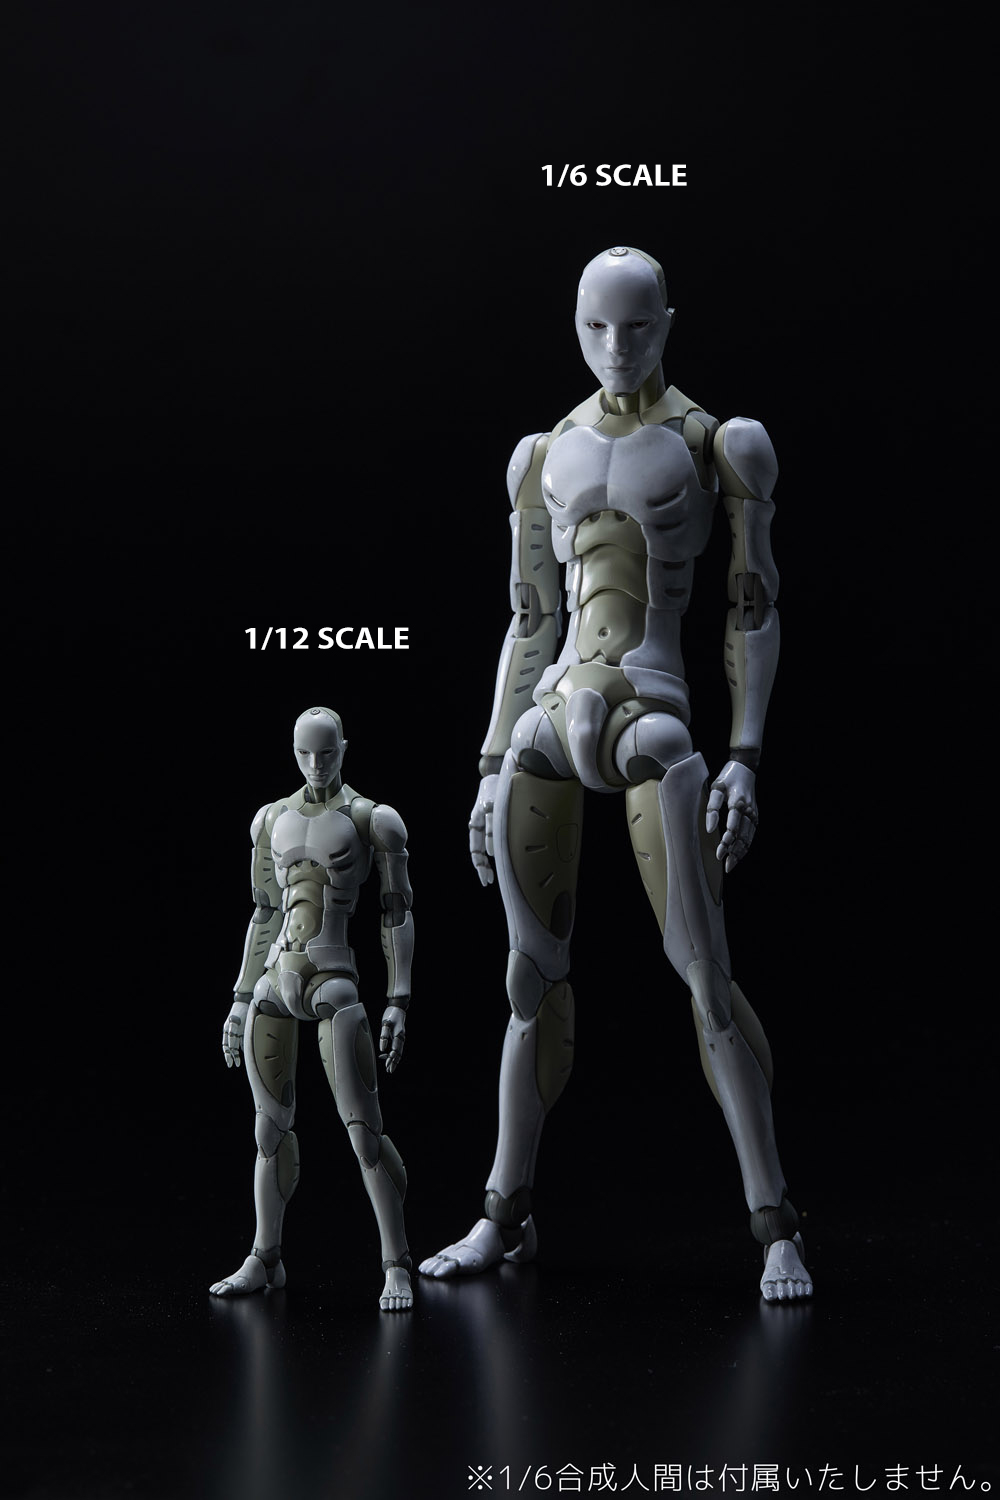 TOA HEAVY INDUSTRIES SYNTHETIC HUMAN PX 1/6 SCALE AF (Net) (